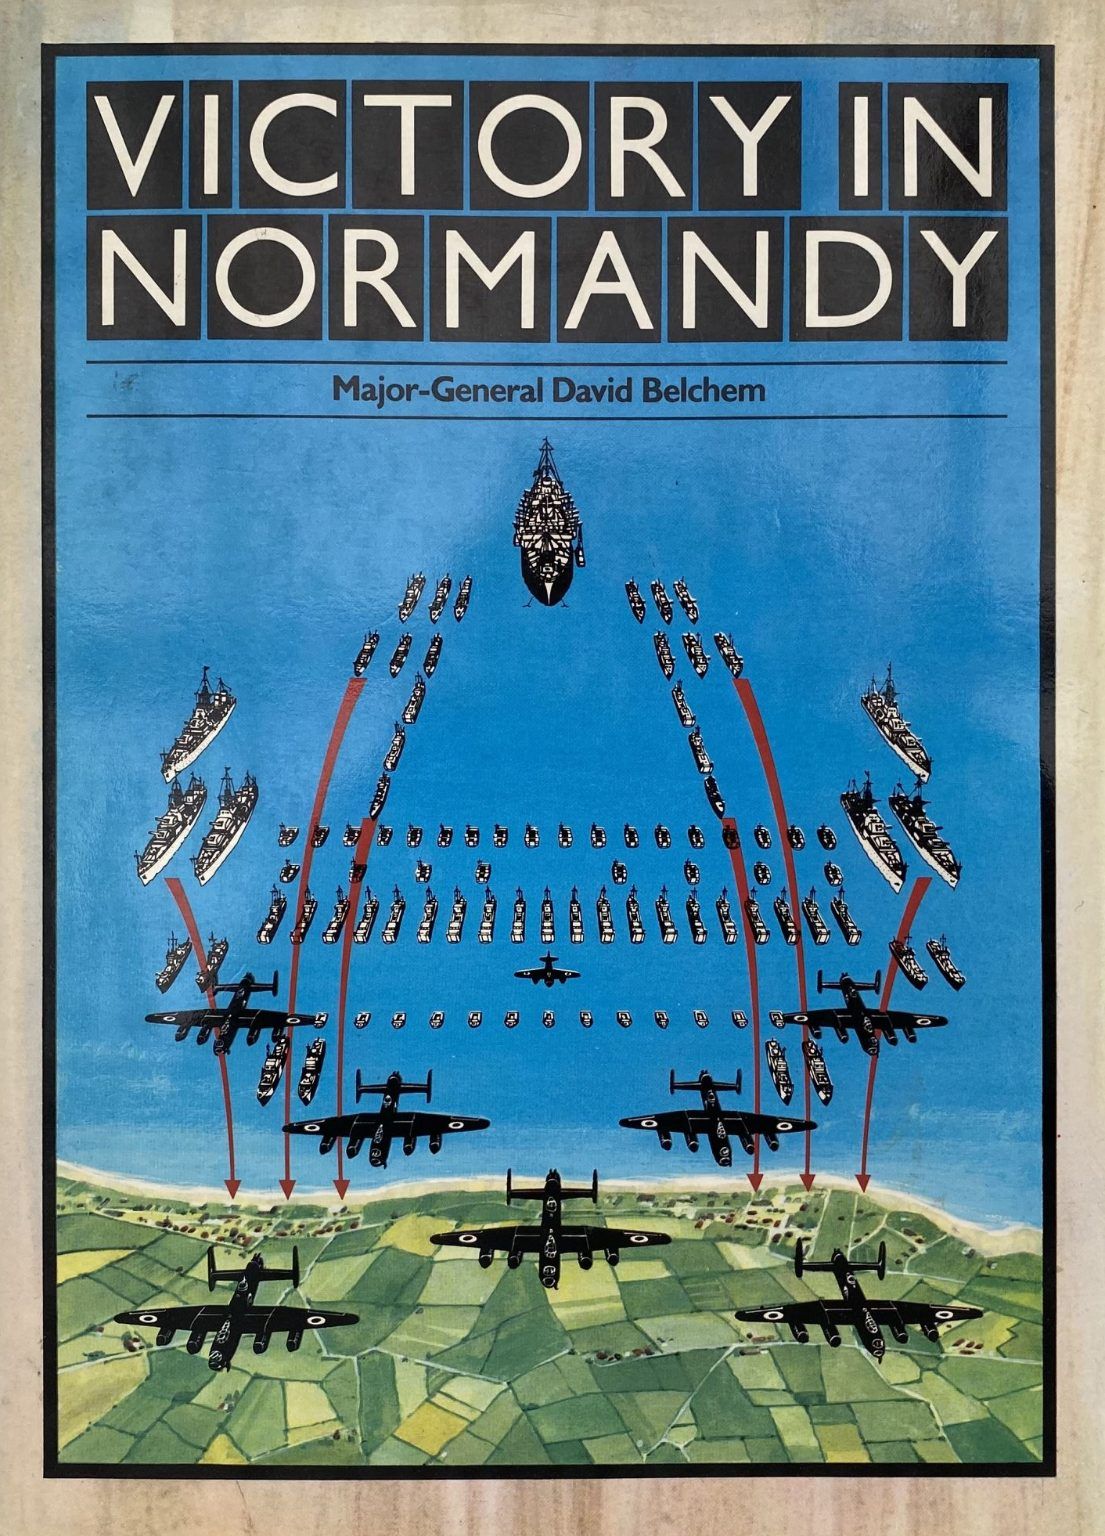 VICTORY IN NORMANDY